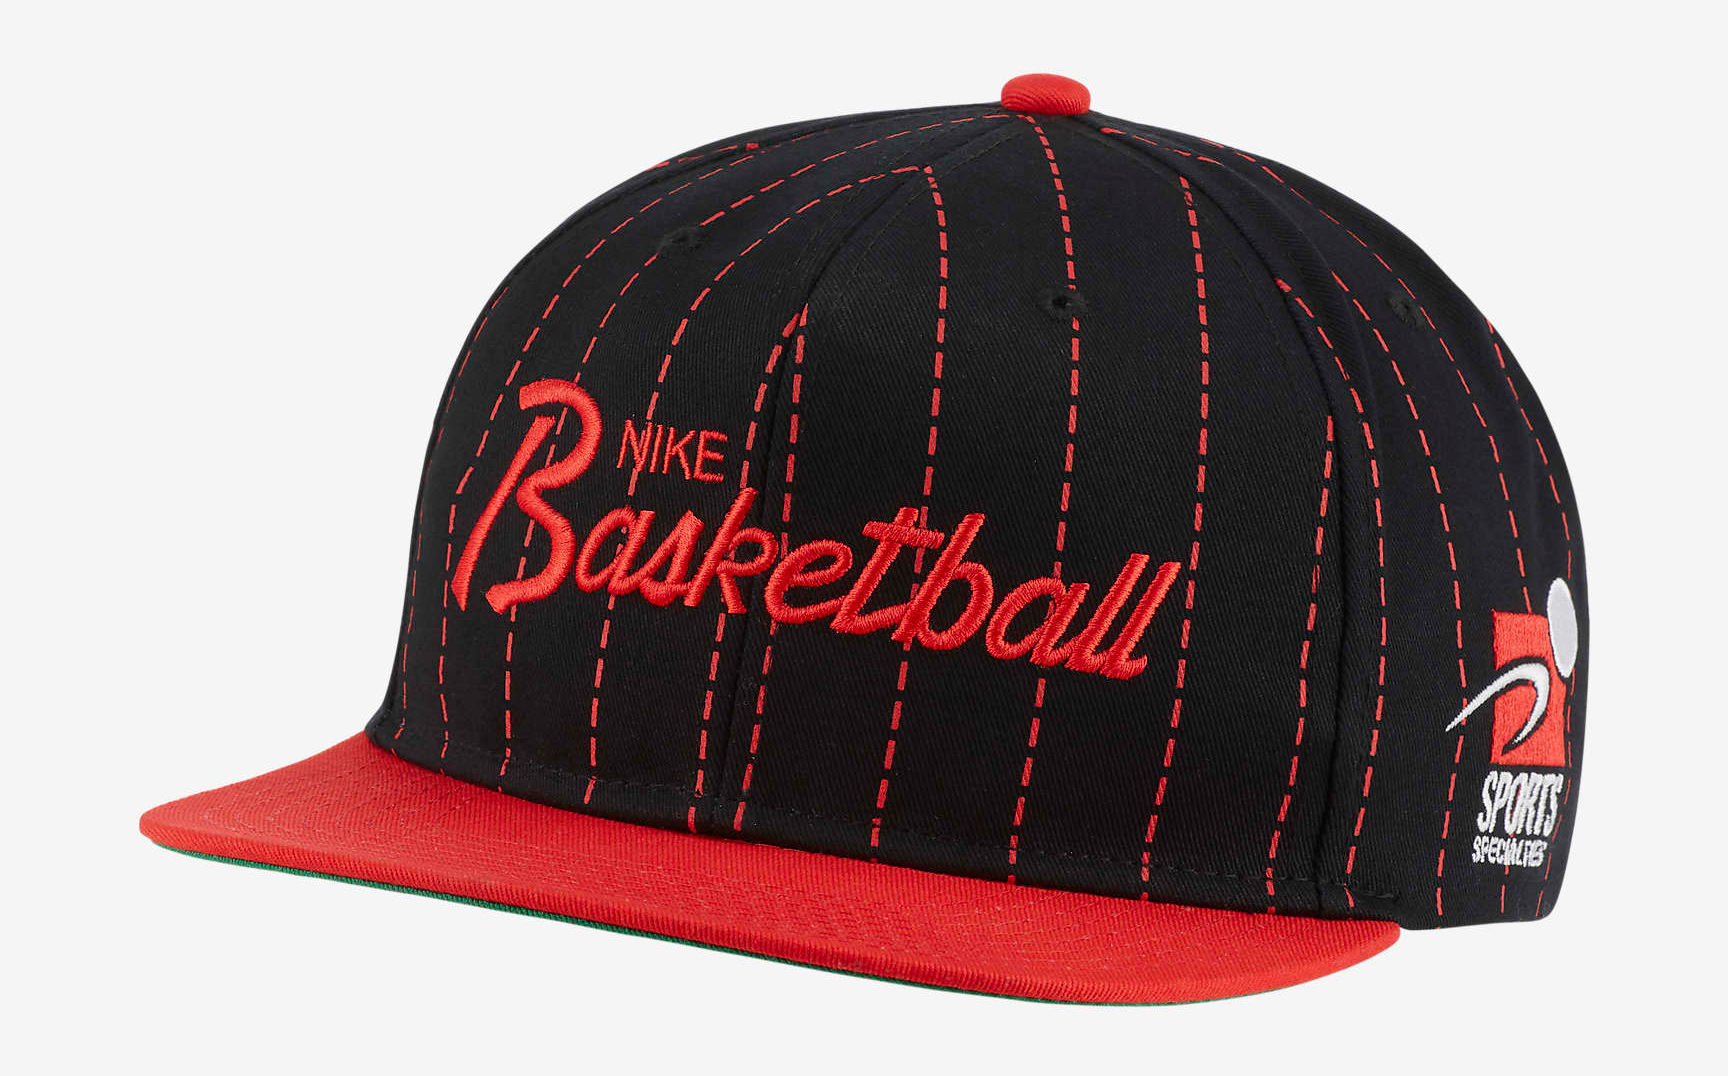 nike-basketball-hat-black-chile-red-1